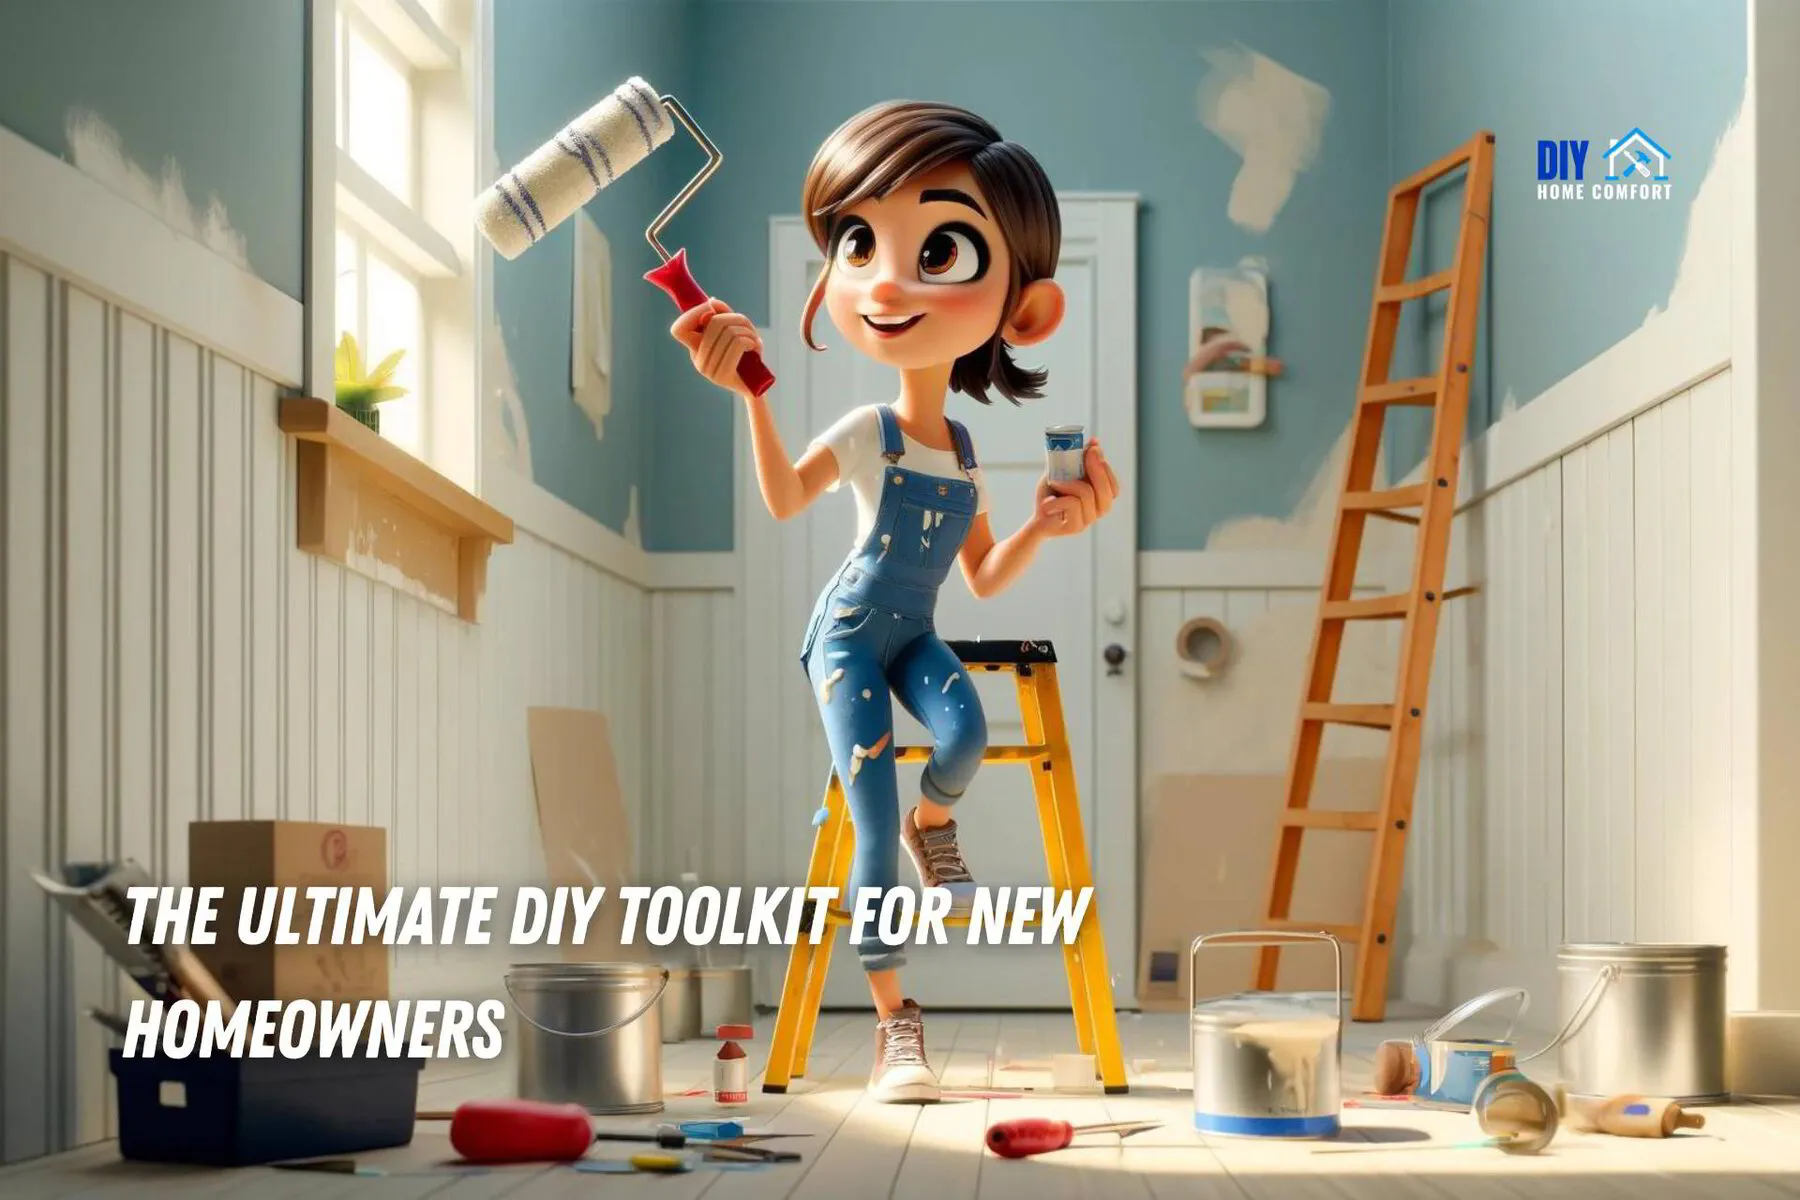 The Ultimate DIY Toolkit for New Homeowners | DIY Home Comfort